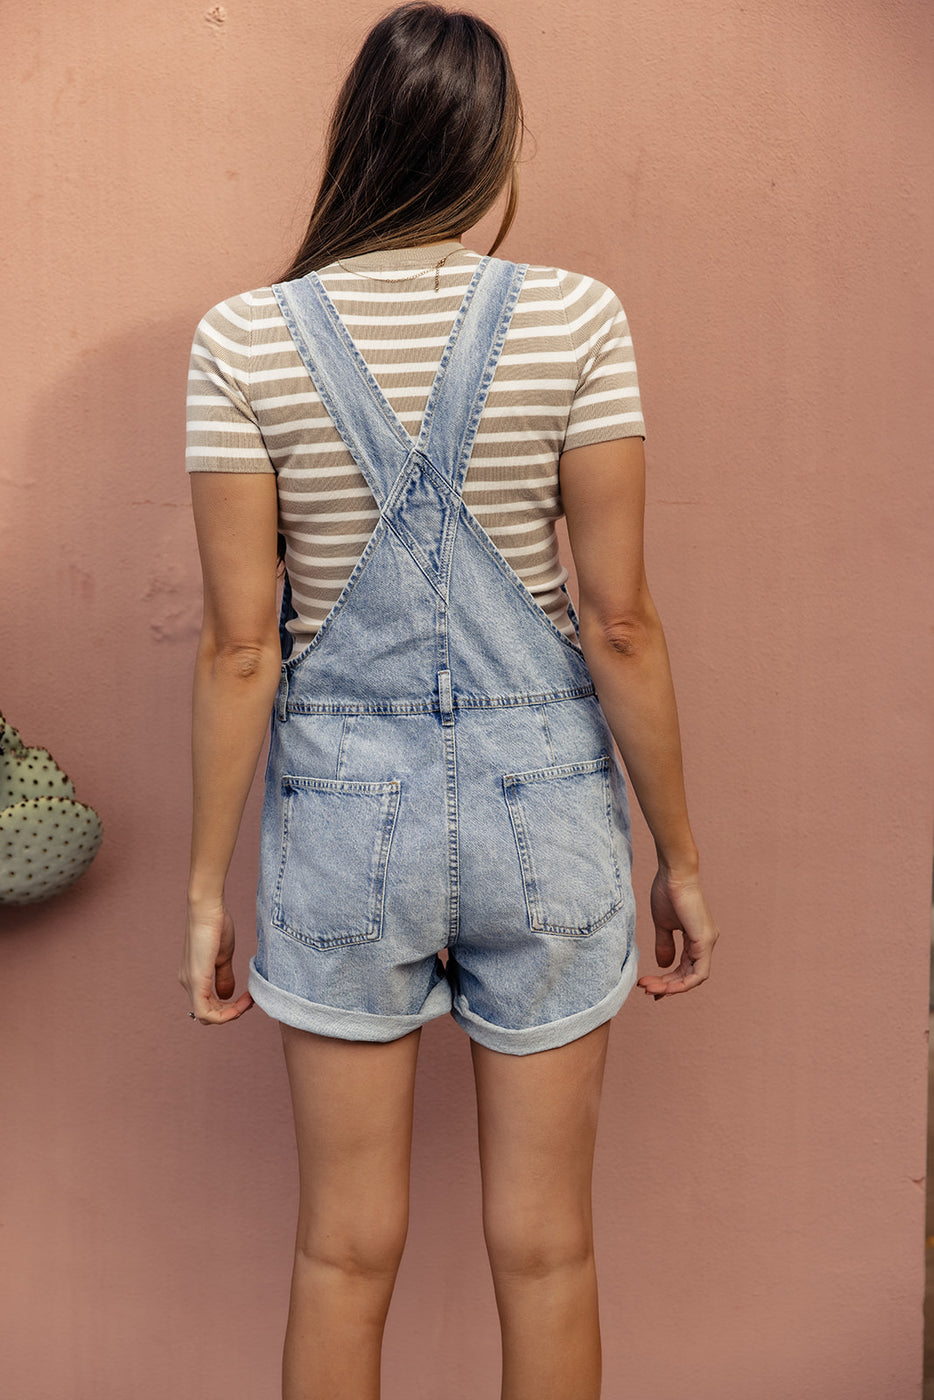 a woman in overalls standing in front of a pink wall